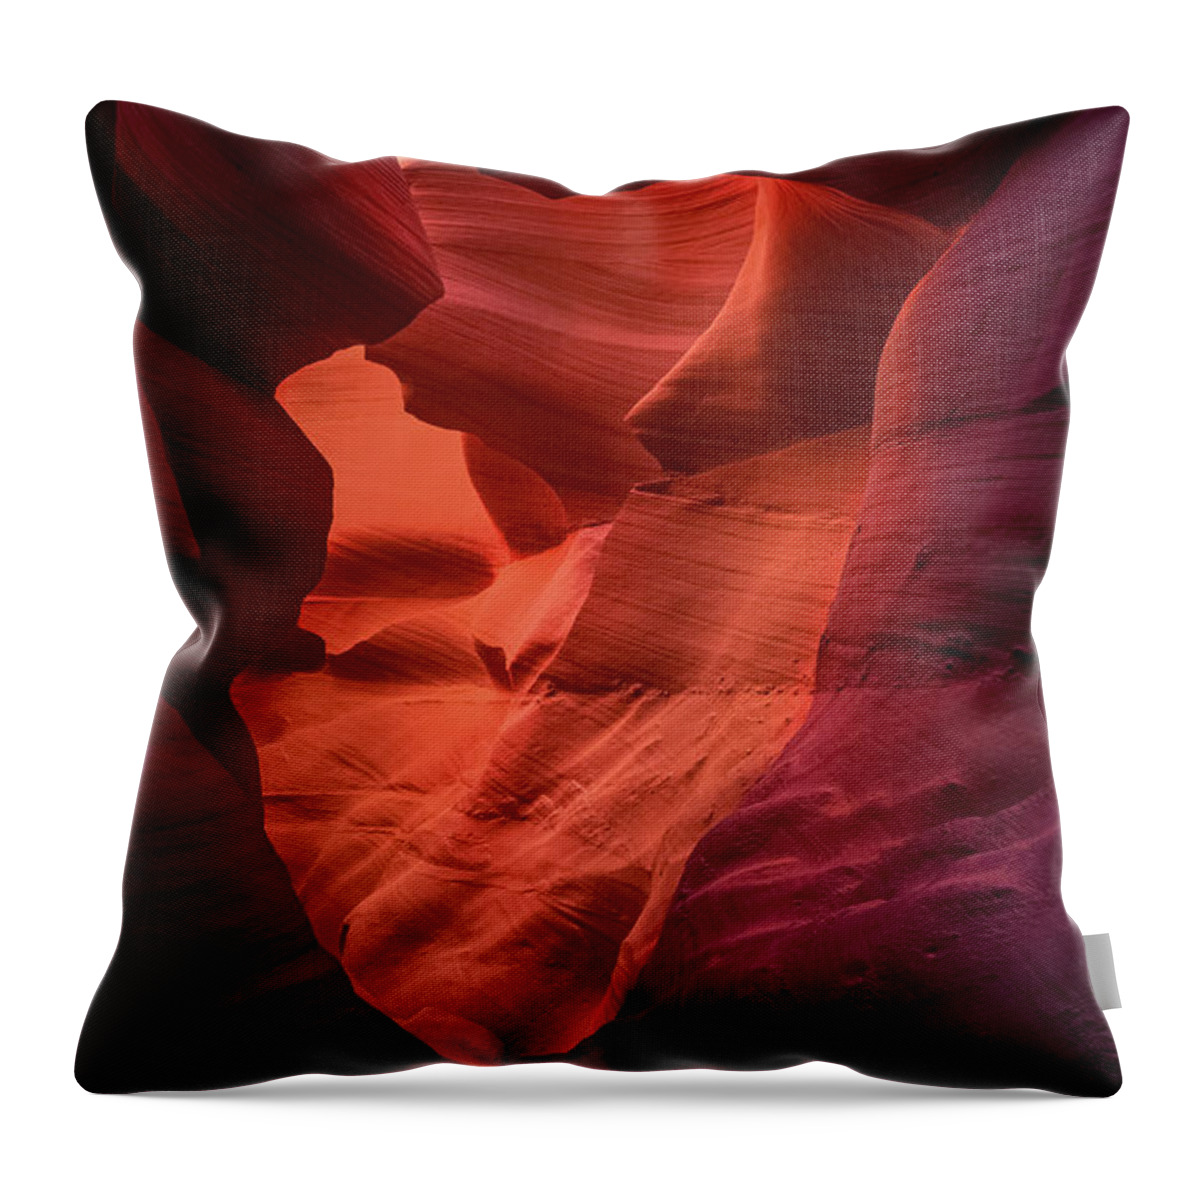 Red Canyon Throw Pillow featuring the photograph Cuore by Marco Crupi